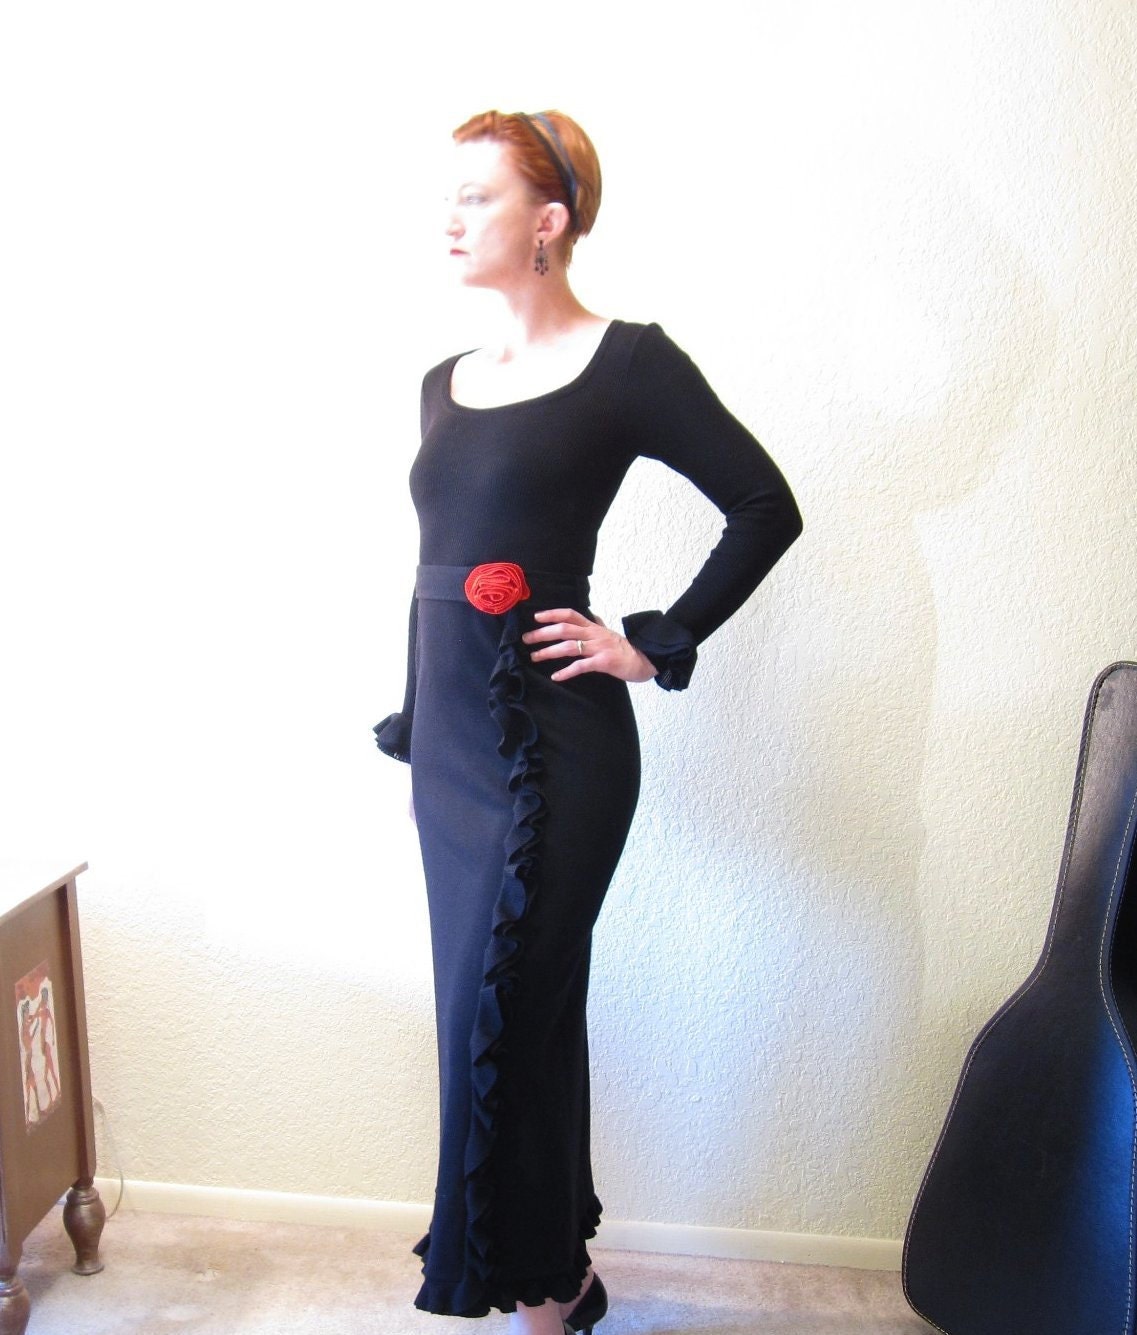 Vintage 60s Maxi Dress. Spanish Red Rose. Flamenco. Ruffle. Knit. Size S. - ChatteJolie